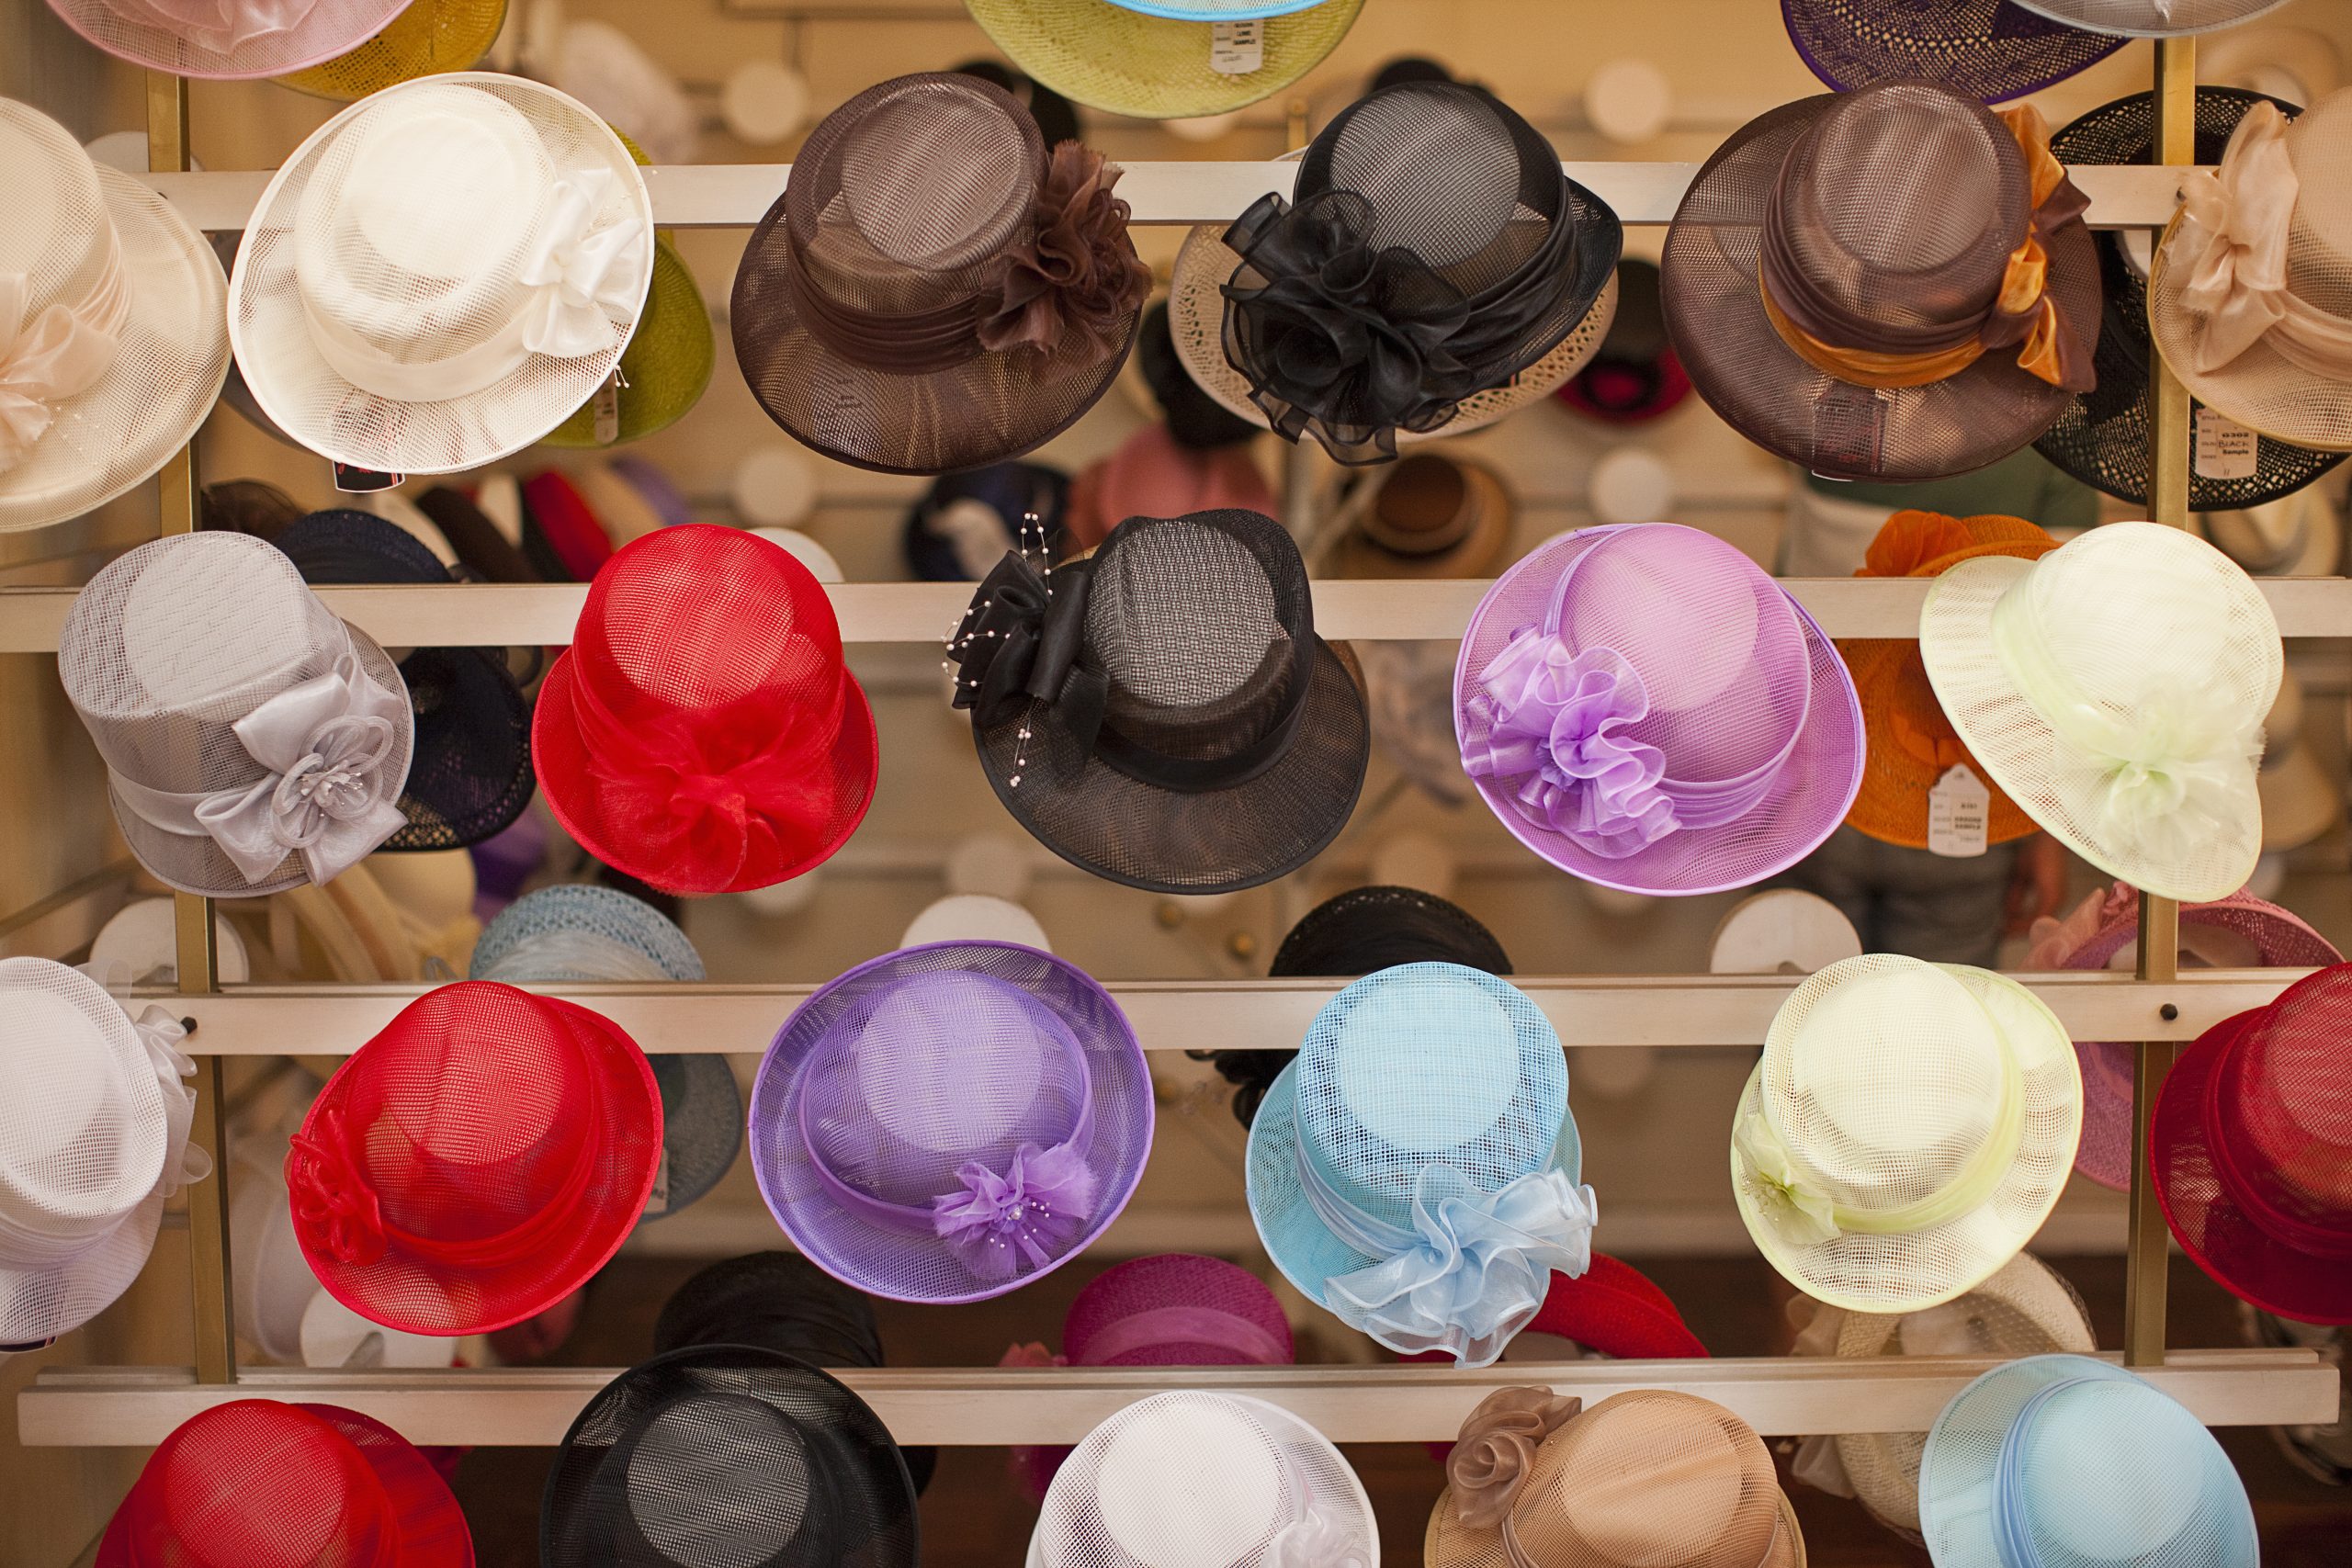 Rows of colorful hats in traditional milliners shop